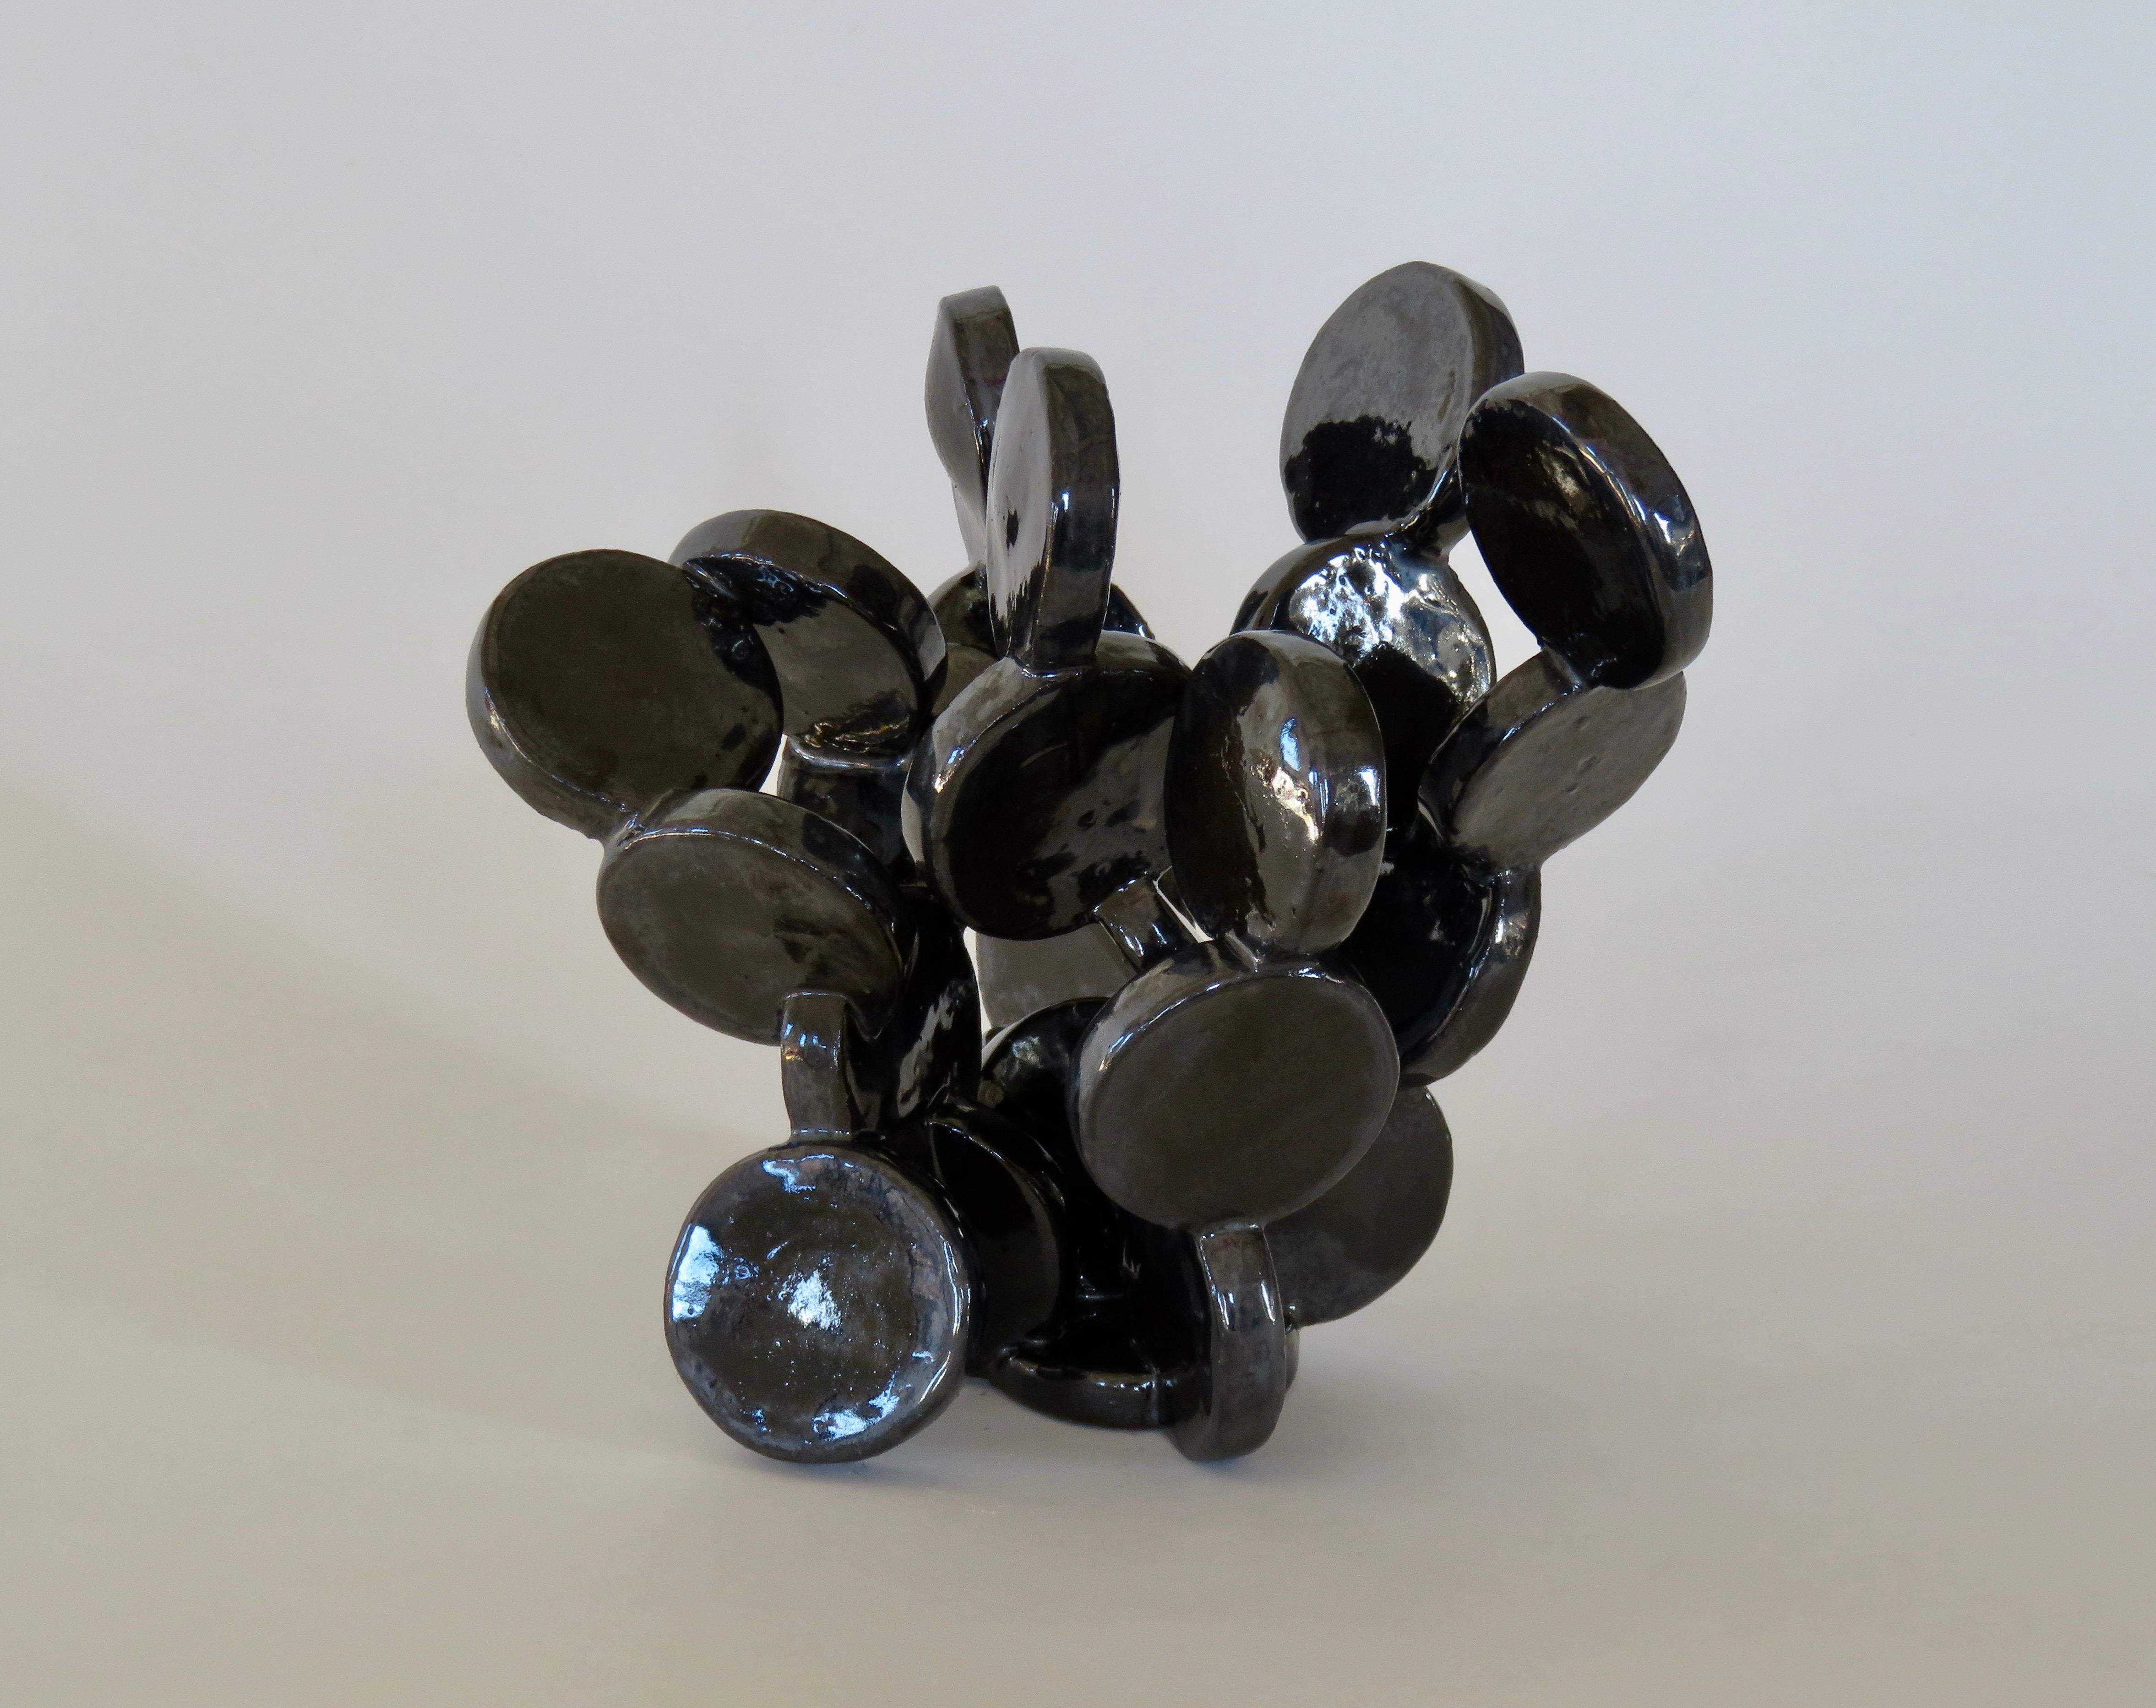 More than 20 small ceramic discs cutout and connected by hand, glaze fired into a unique, shiny black table-top sculpture. Reminiscent of a favorite plant or molecular structure, different from every angle. Fully handmade, no two are ever